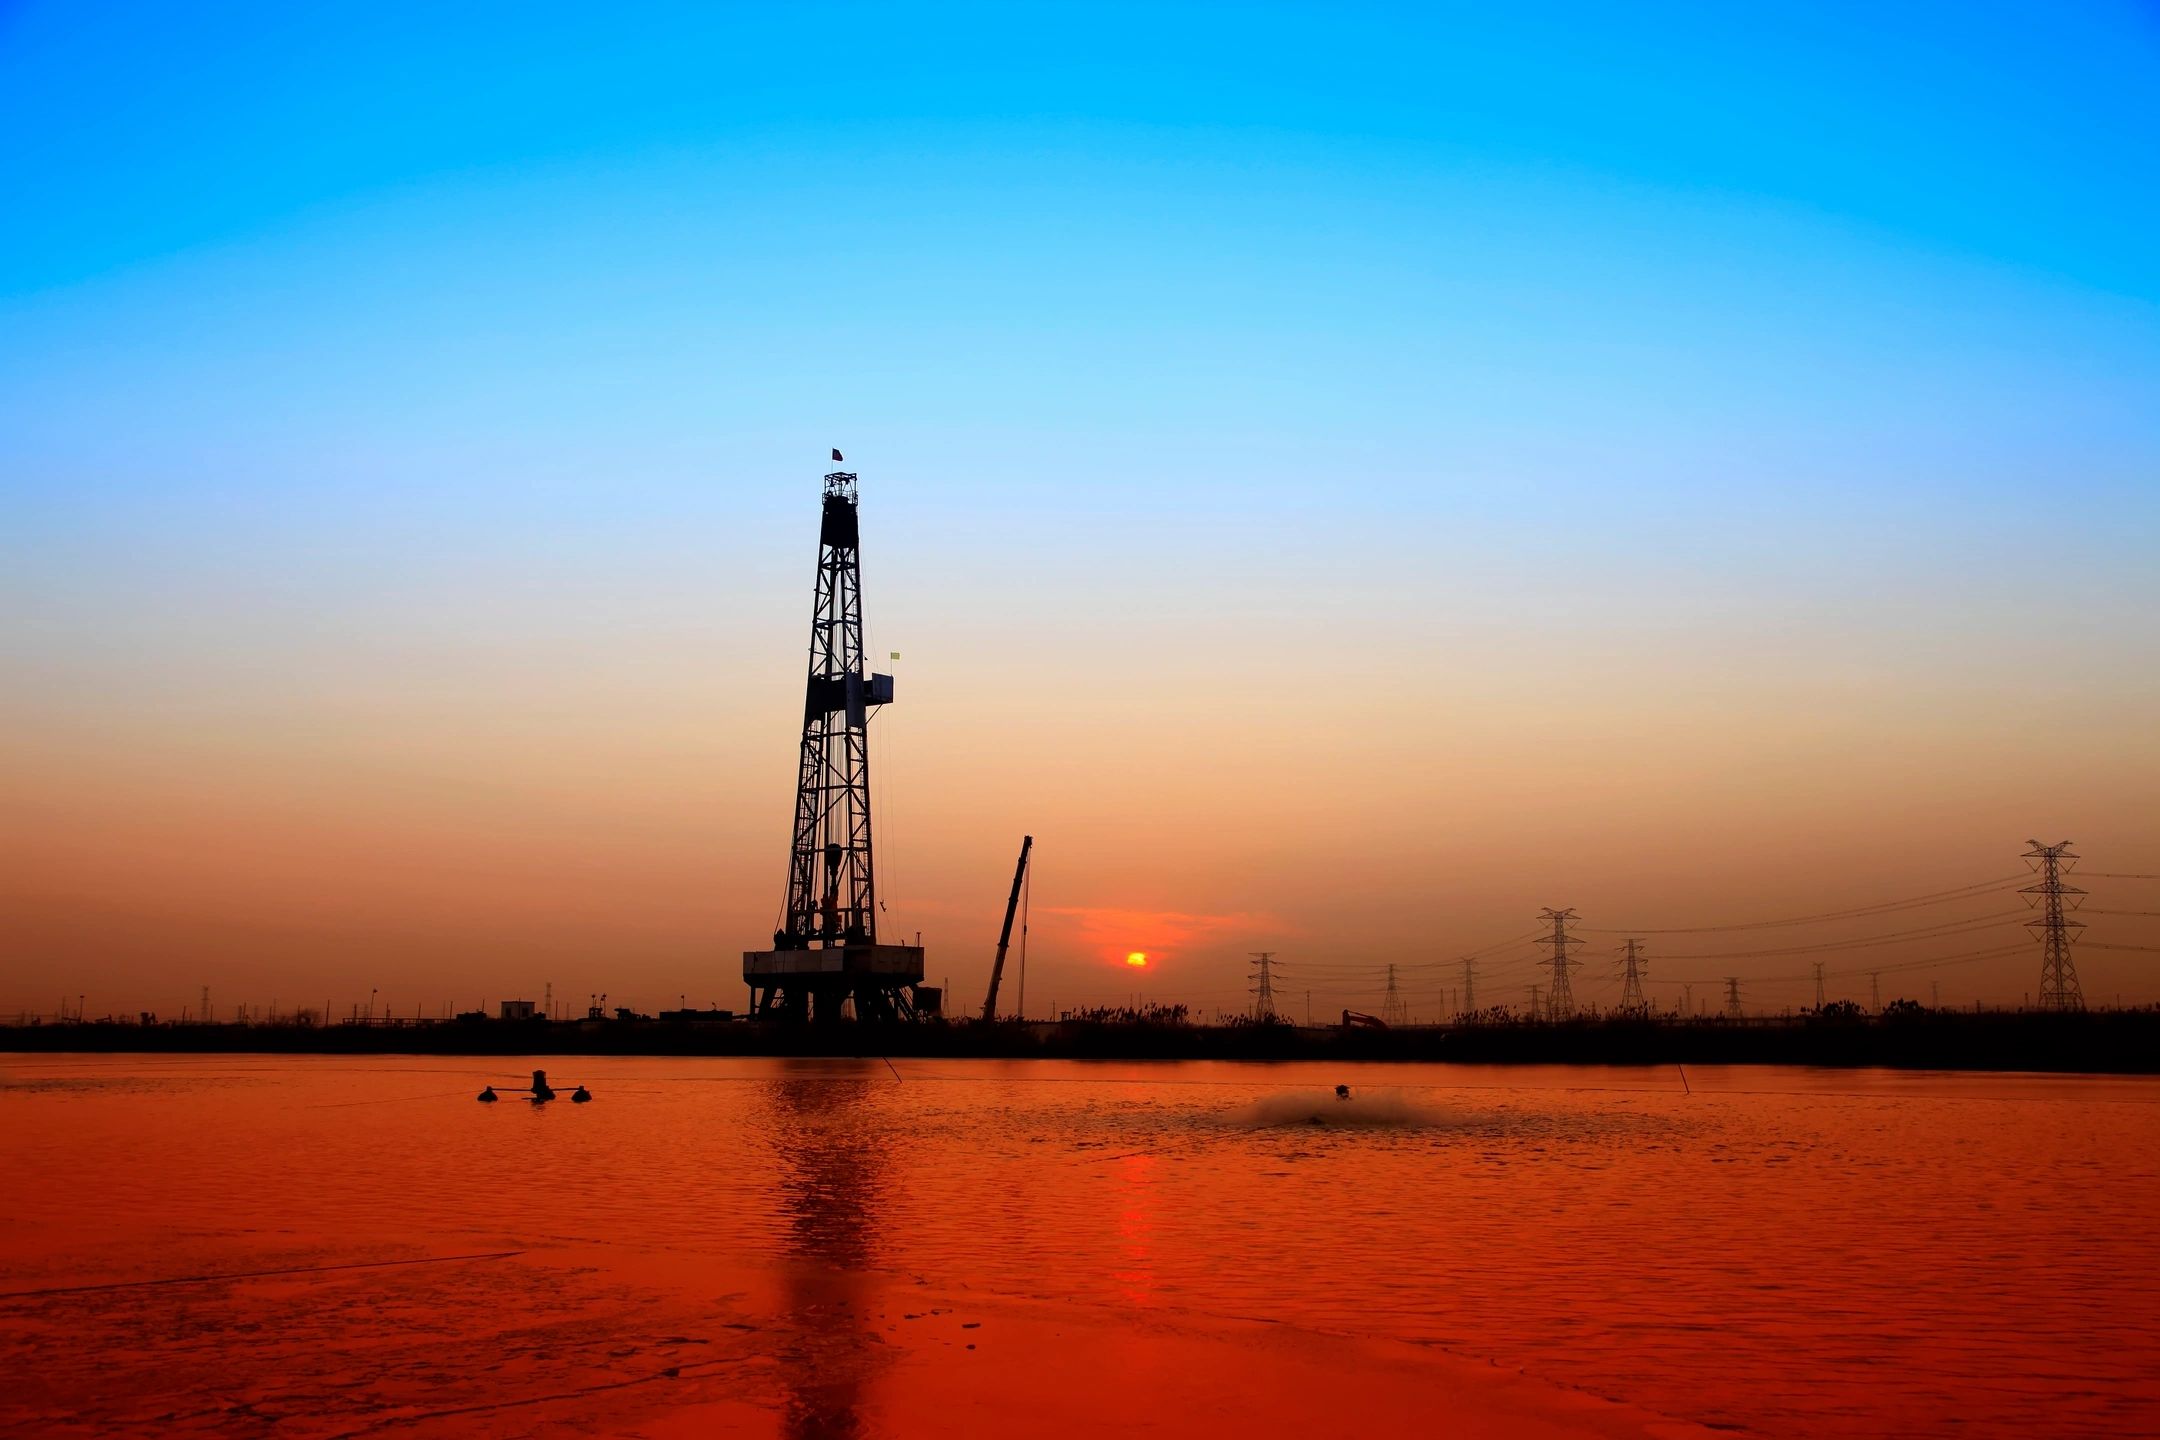 Large oil equipment close to water at sunset